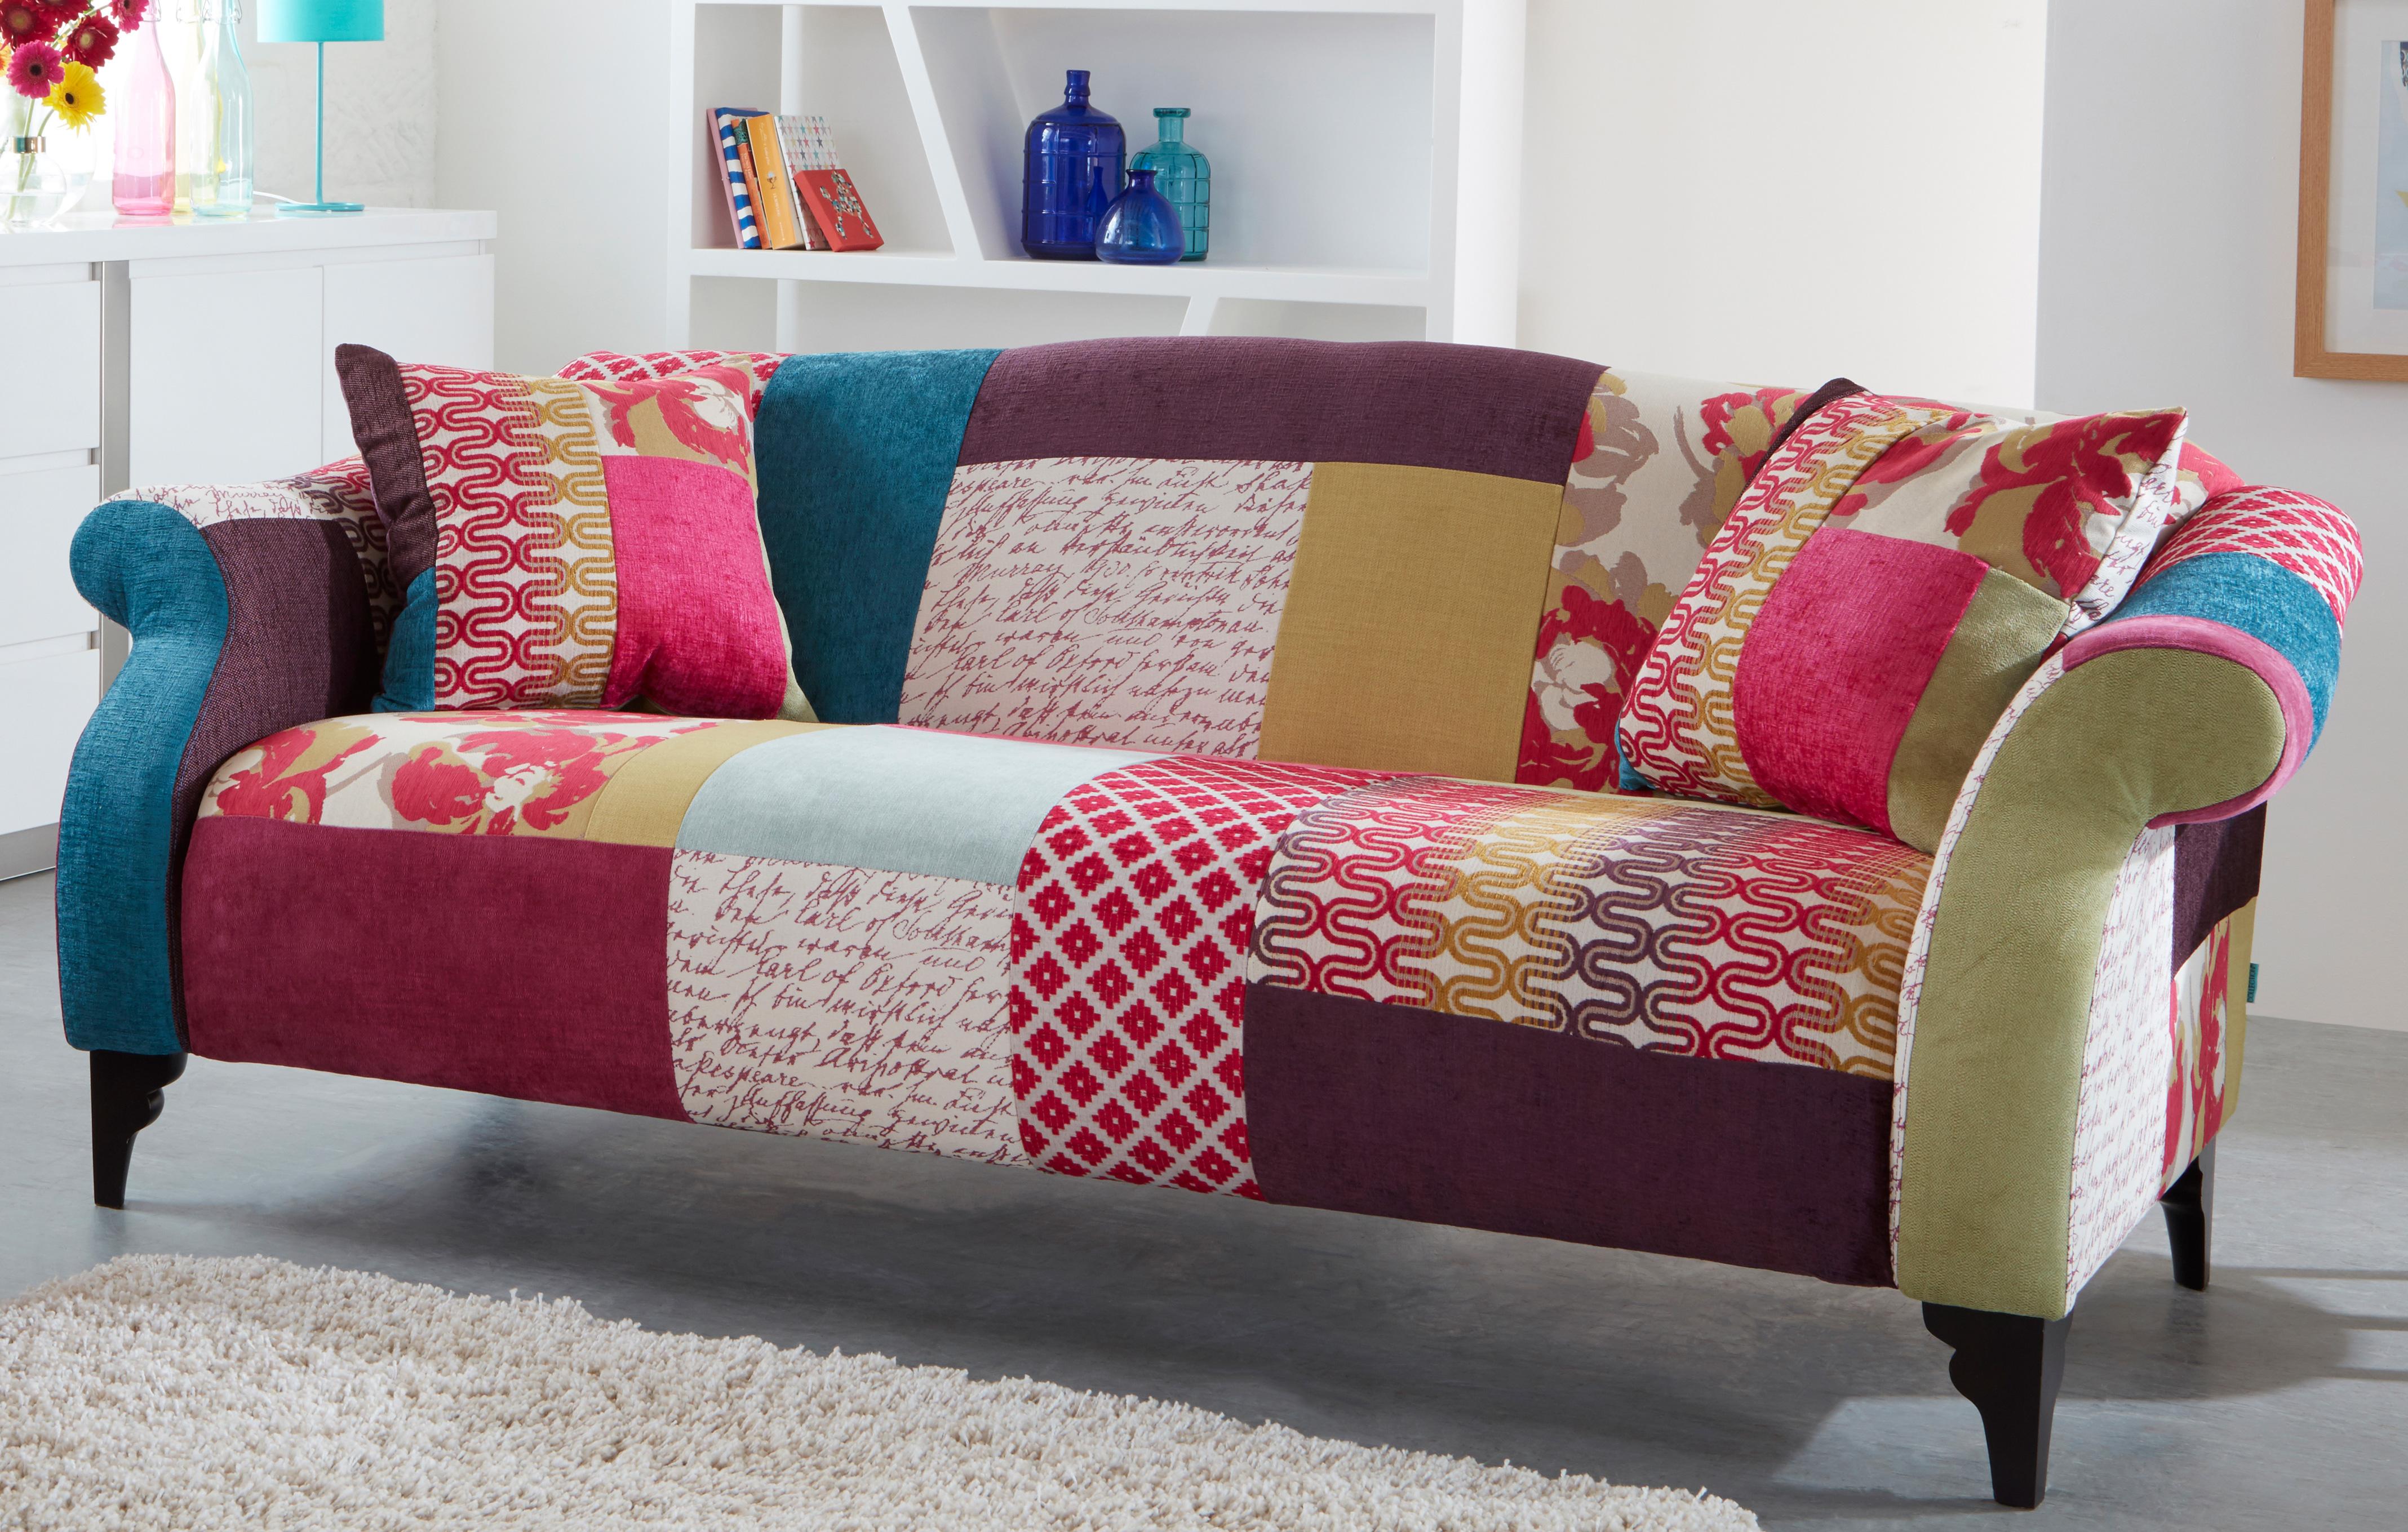 See our full range of quality fabric sofas Ireland | DFS Ireland